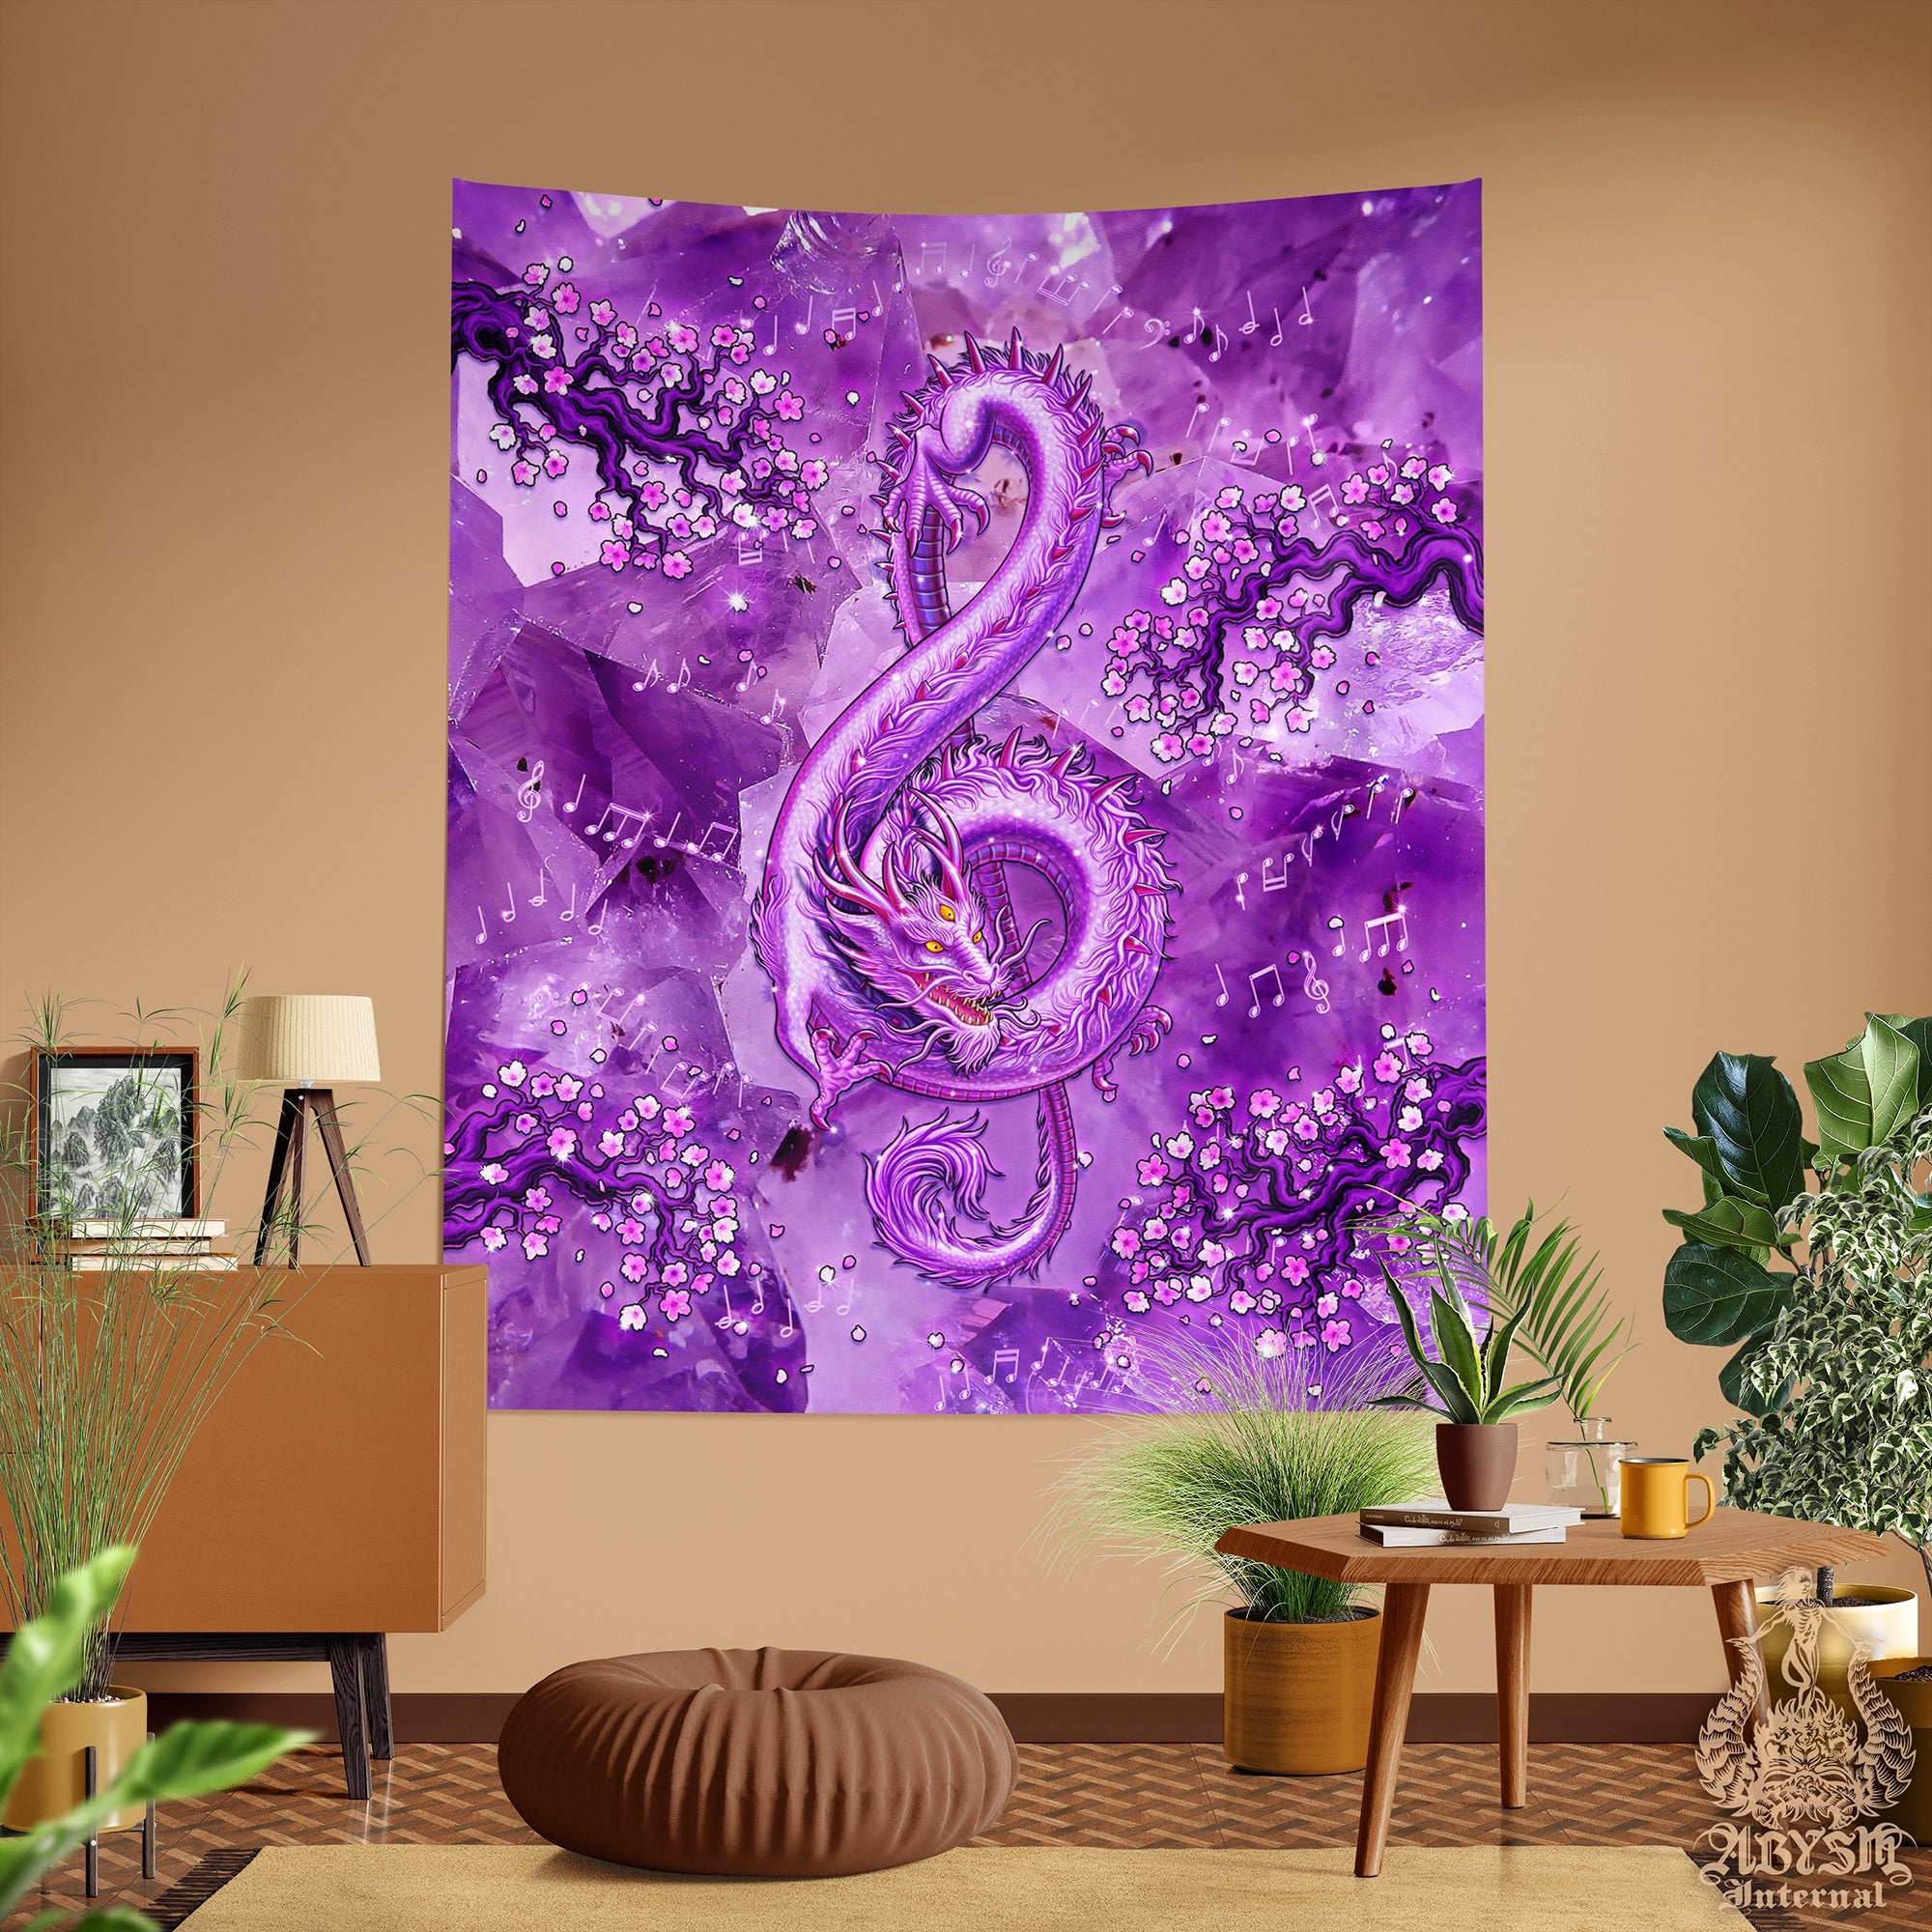 Dragon Tapestry, Music Wall Hanging, Boho and Indie Home Decor, Vertical Art Print - Gemstone, Treble Clef, 8 Colors - Abysm Internal